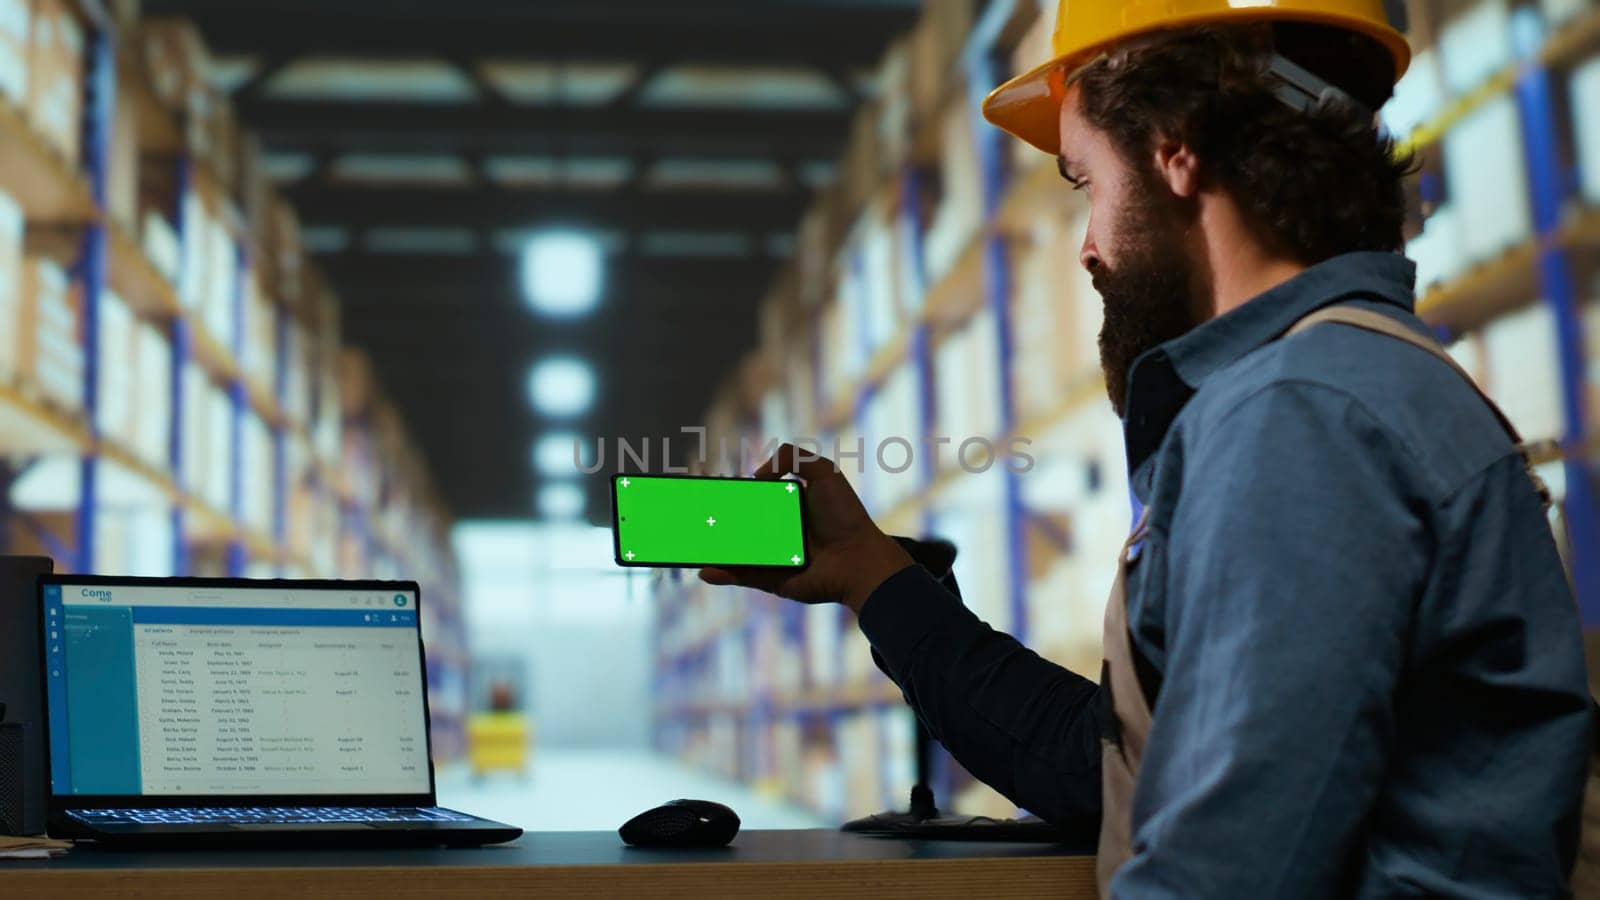 Warehouse manager looks at greenscreen on smartphone display, working on parcel shipment and delivery in industrial depot. Quality control advisor using blank copyspace mockup screen.